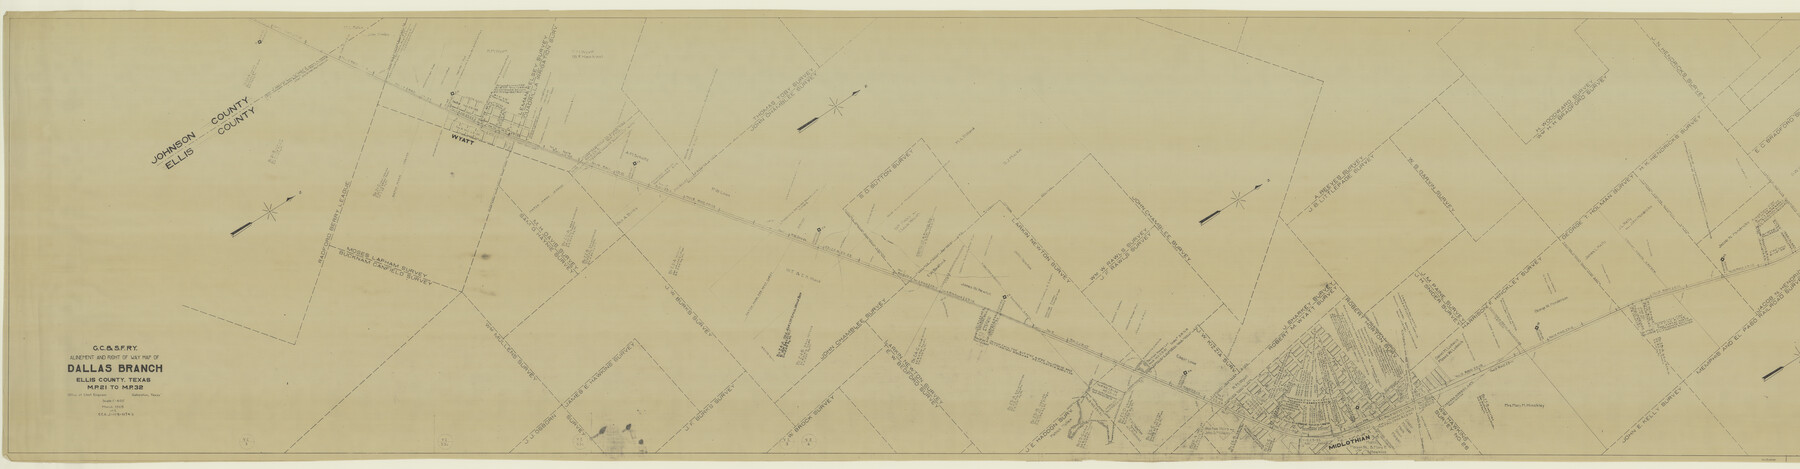 64547, G.C. & S.F. Ry. Alinement and Right of Way map of Dallas Branch, Ellis County, Texas, General Map Collection